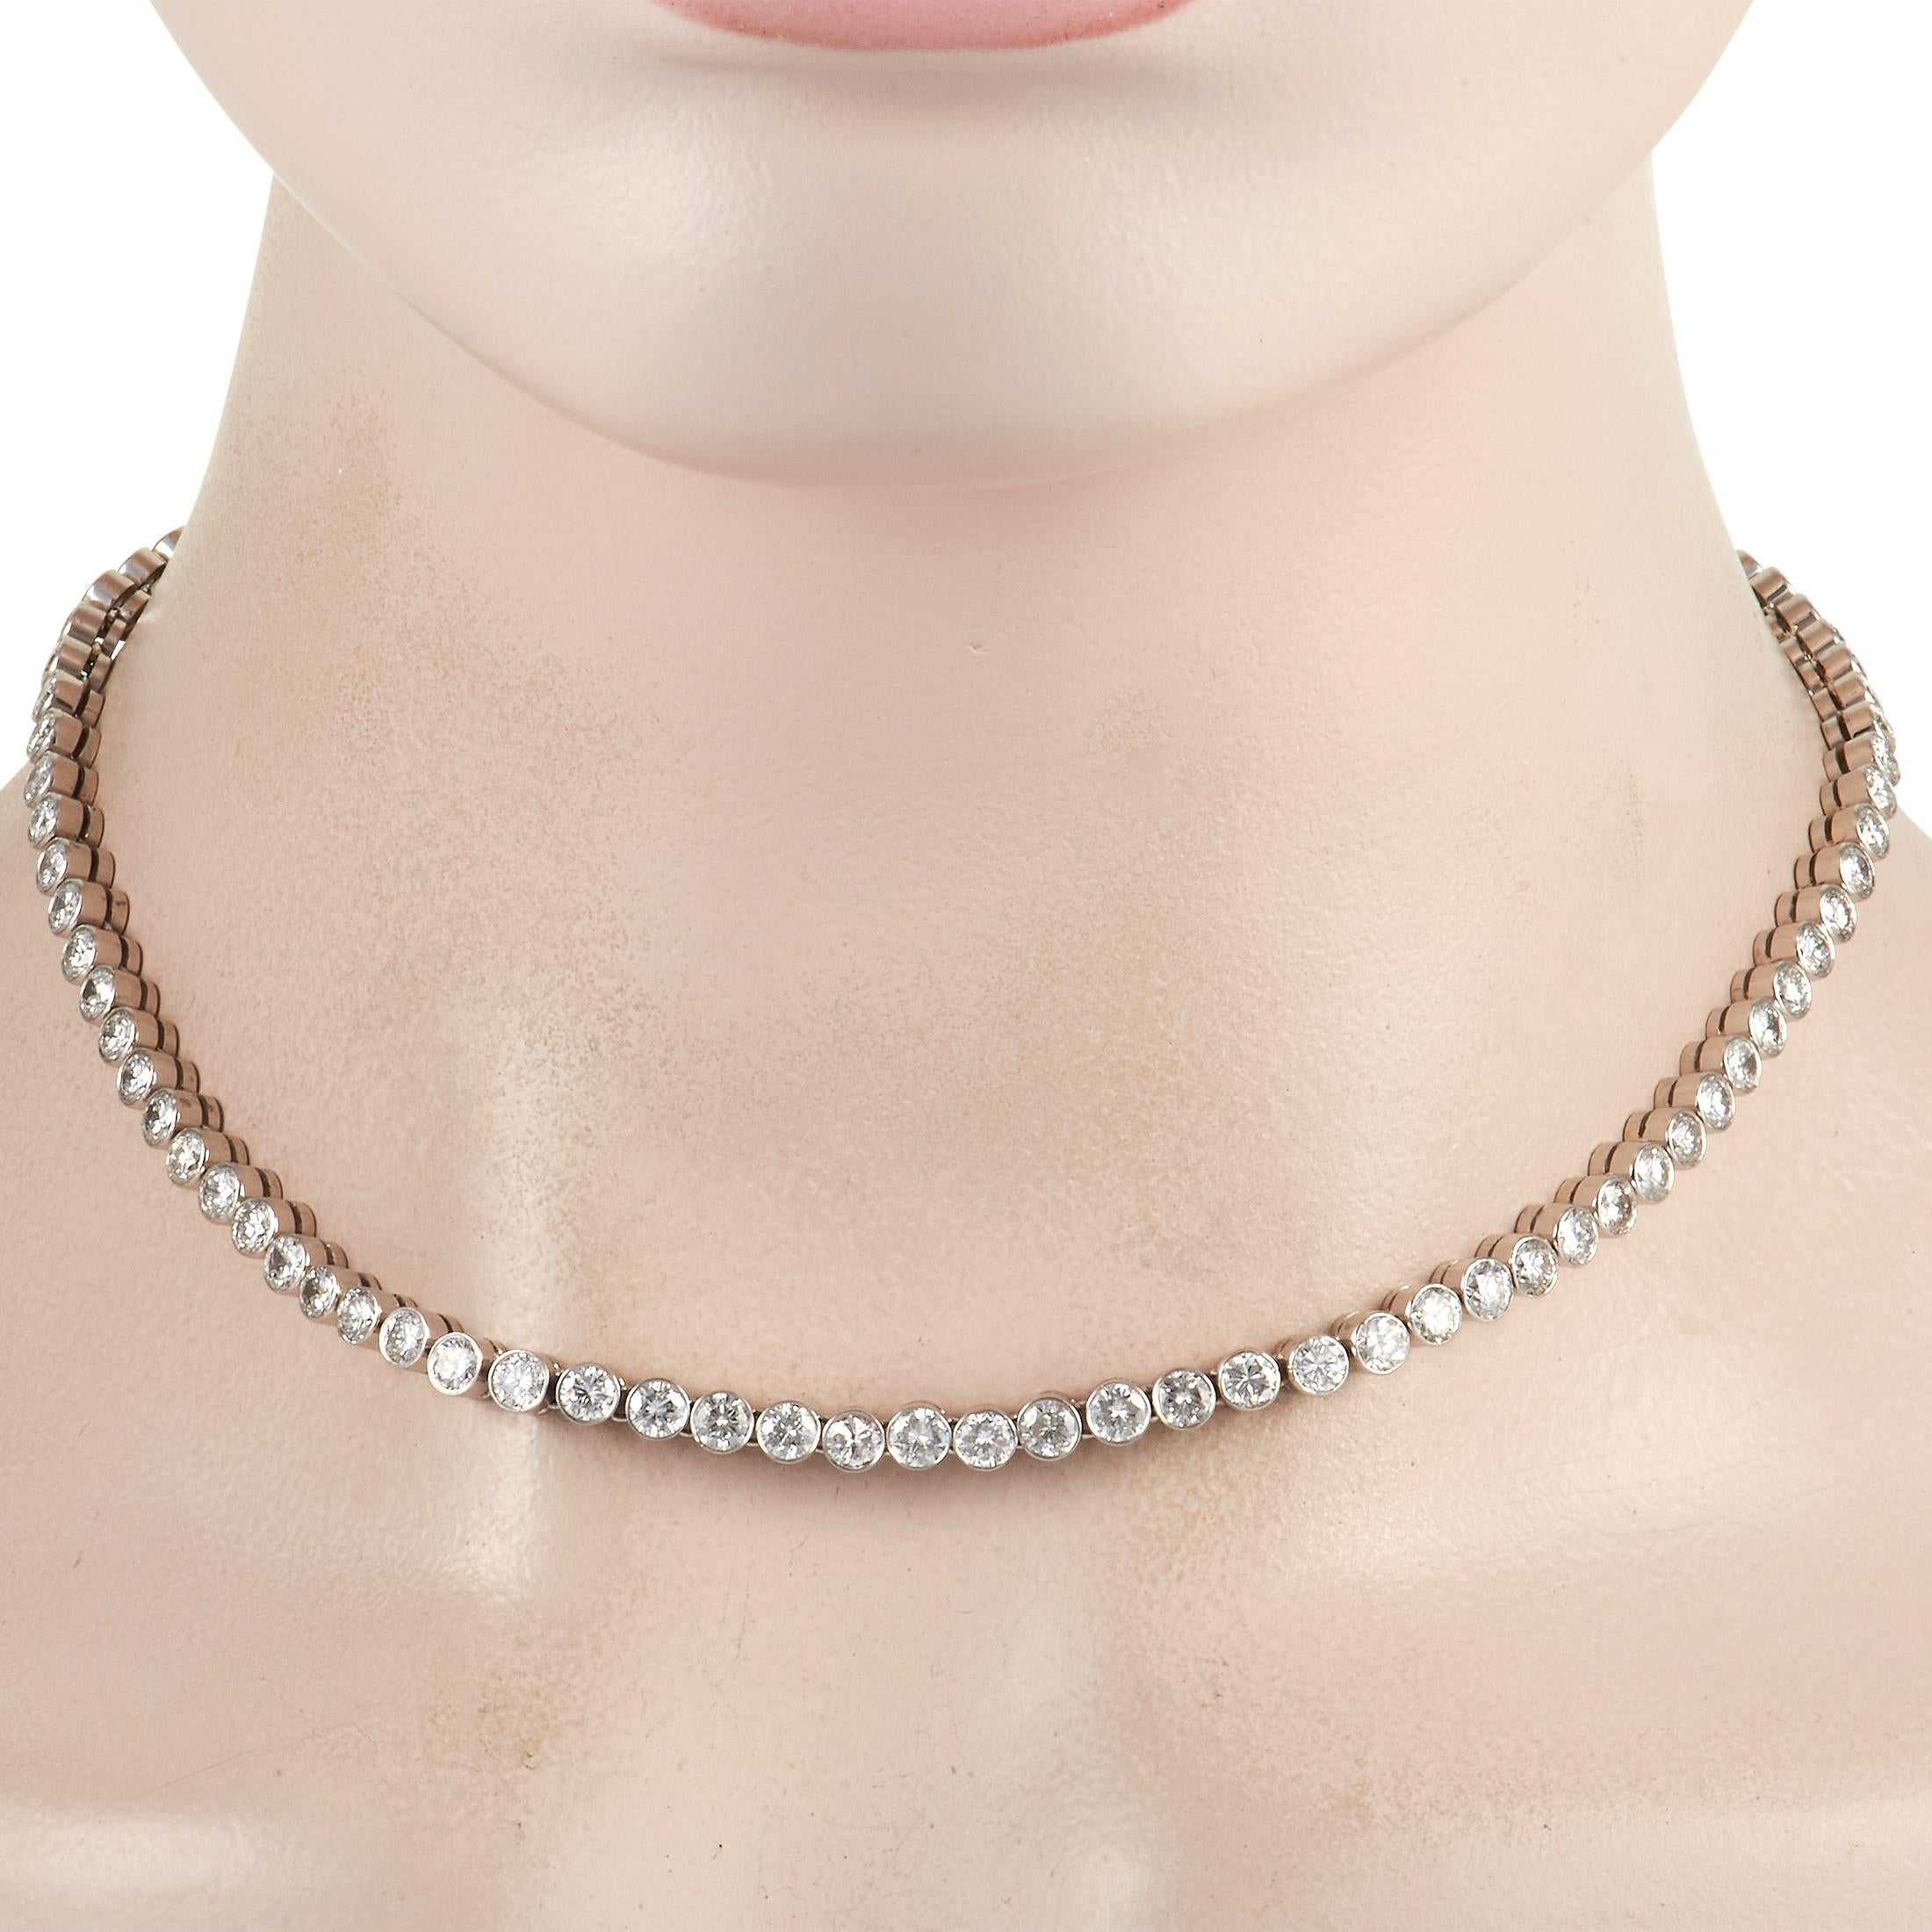 All eyes will be on this stunning LB Exclusive Platinum 18.80 ct Diamond Necklace. The necklace is made with platinum and set with a single row of round-cut diamonds over its length, totalling 18.80 carats of diamonds over the piece. The platinum